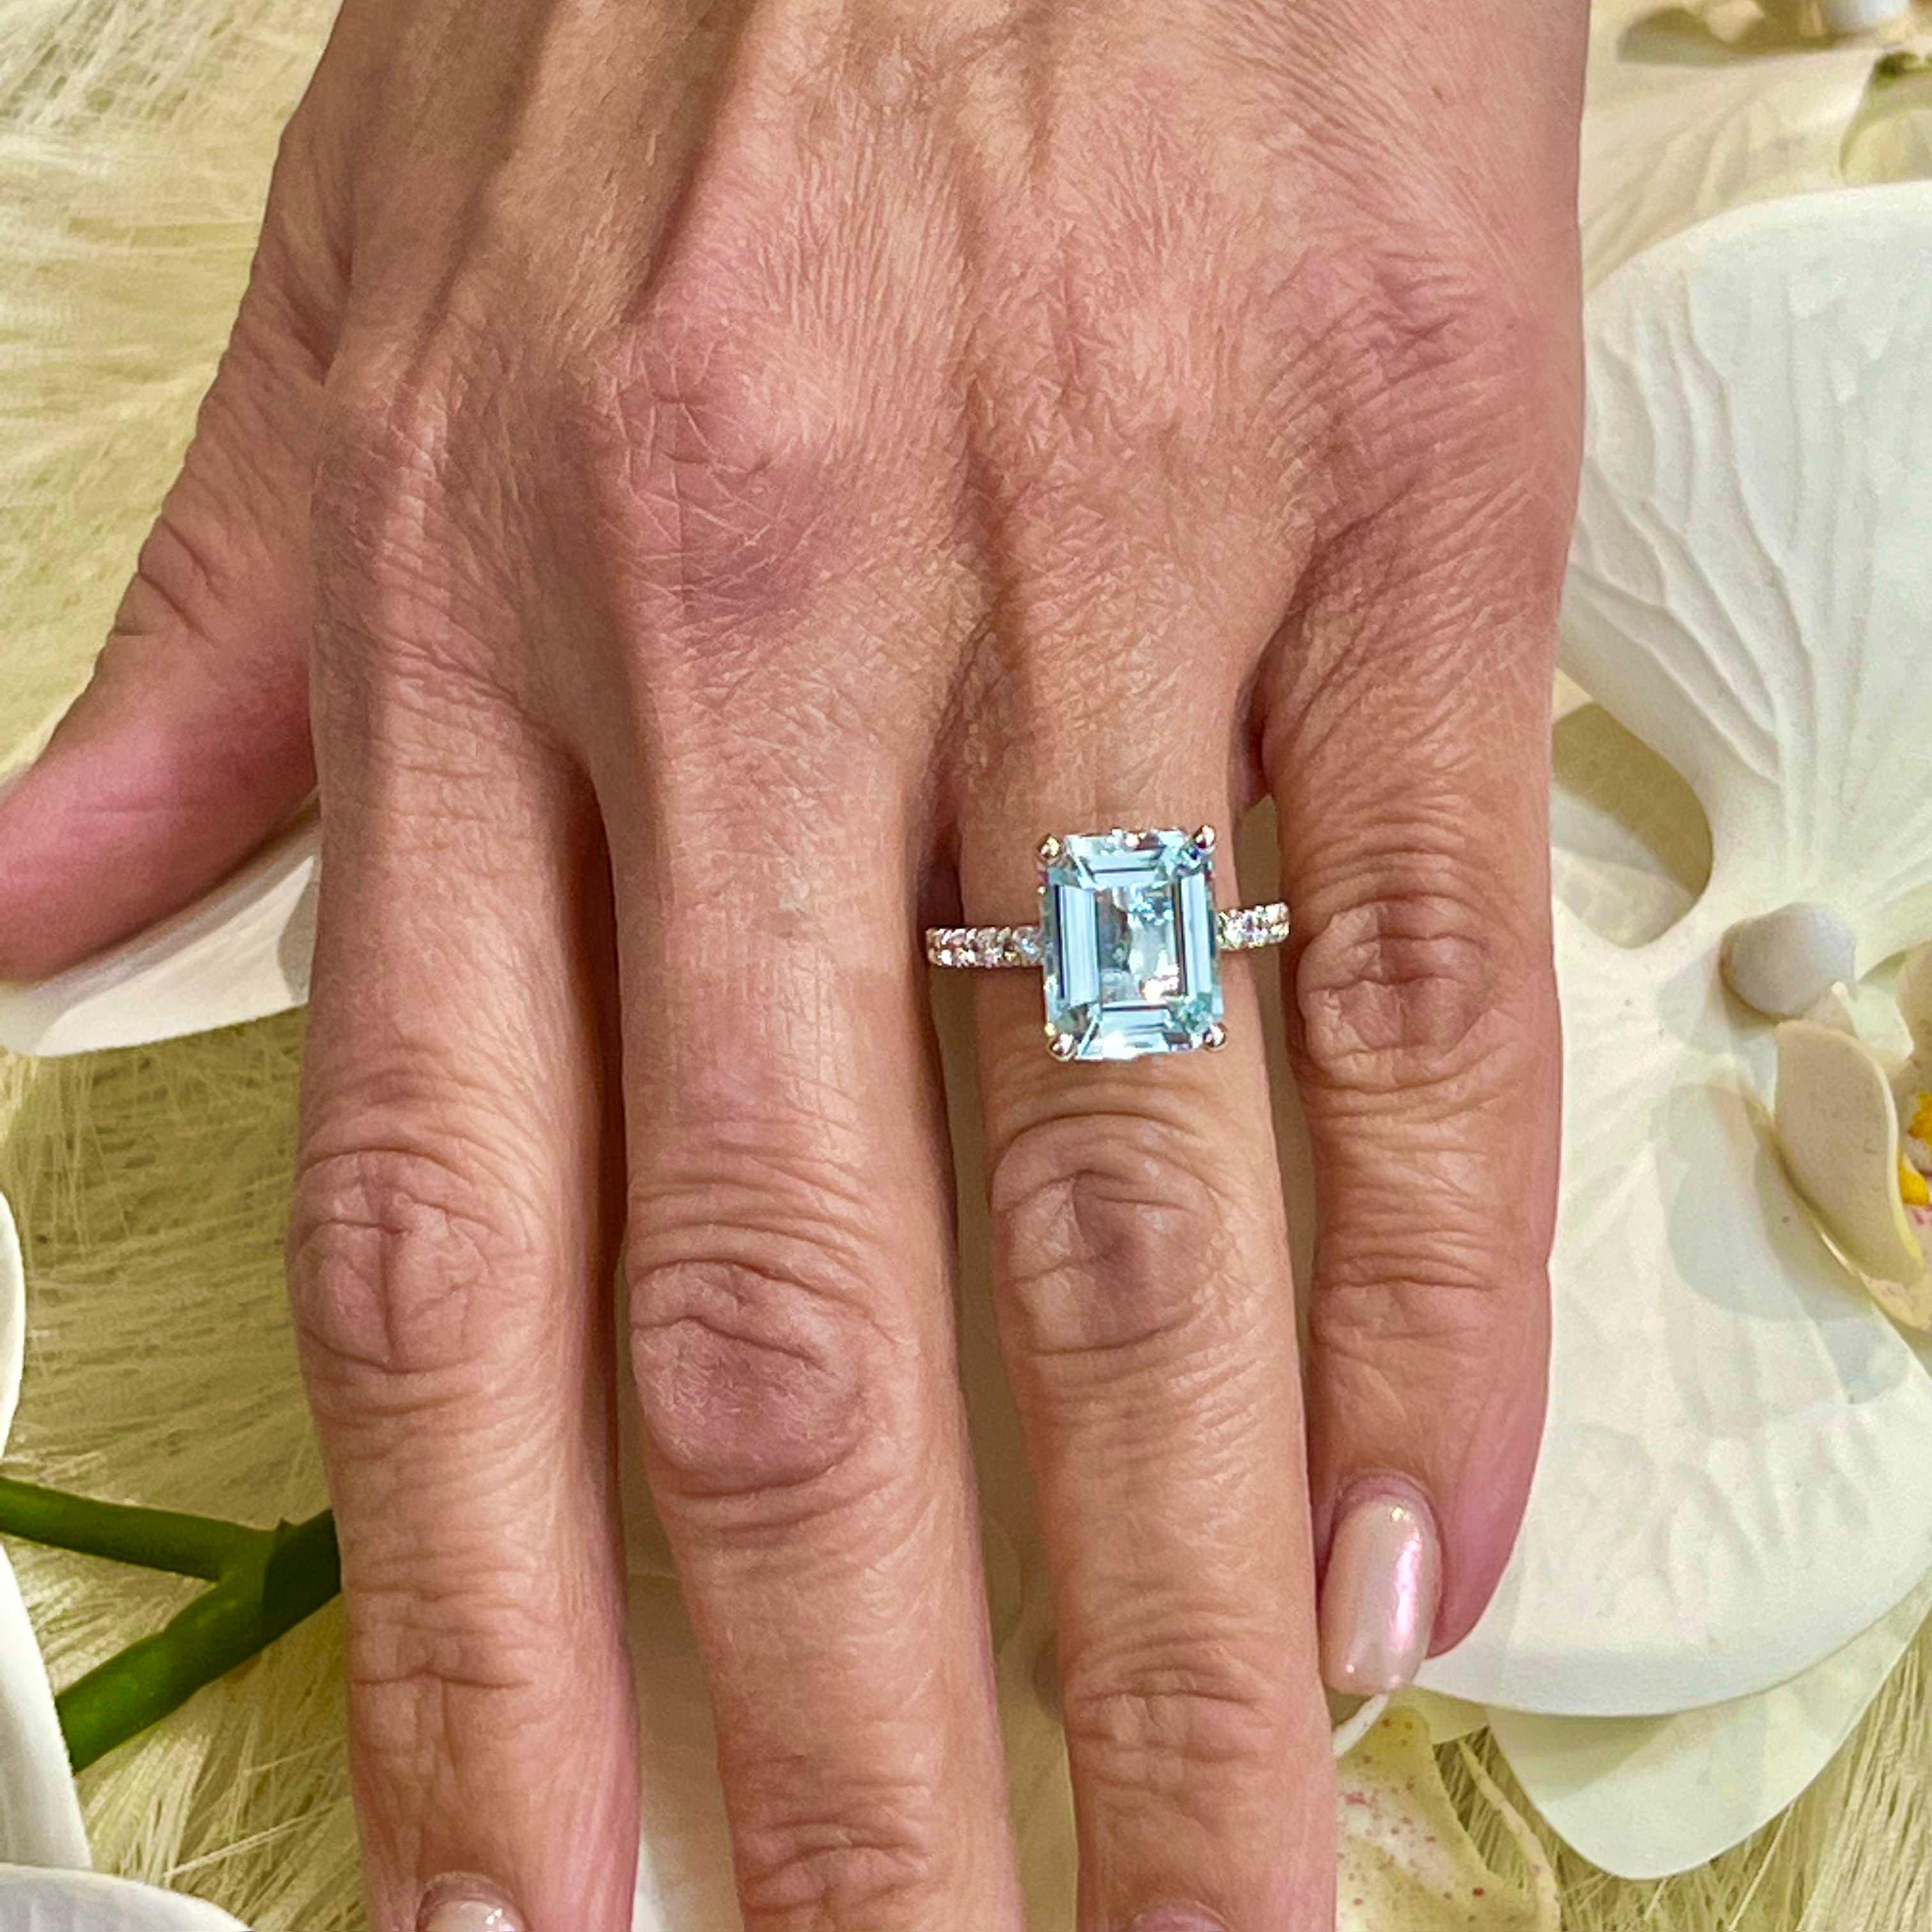 Natural Aquamarine Diamond Ring 14k W Gold 5.78 TCW Certified In Good Condition For Sale In Brooklyn, NY